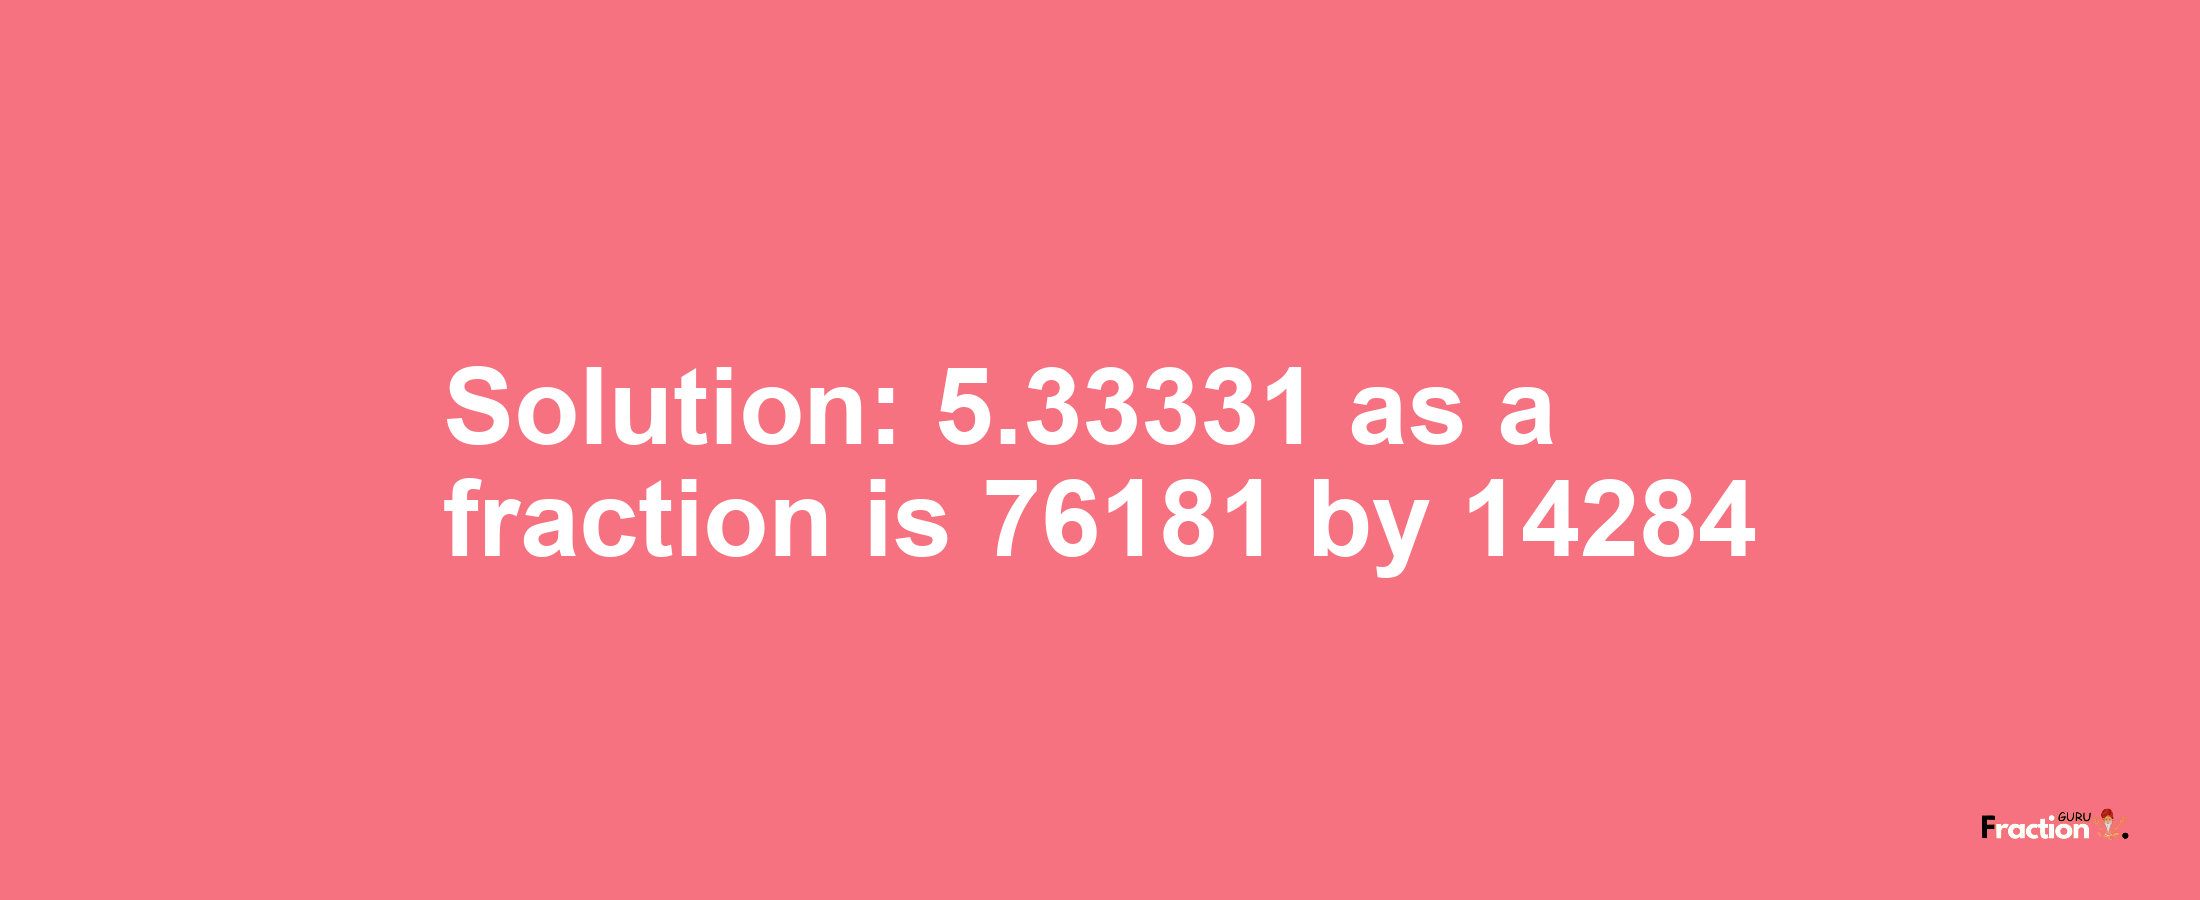 Solution:5.33331 as a fraction is 76181/14284